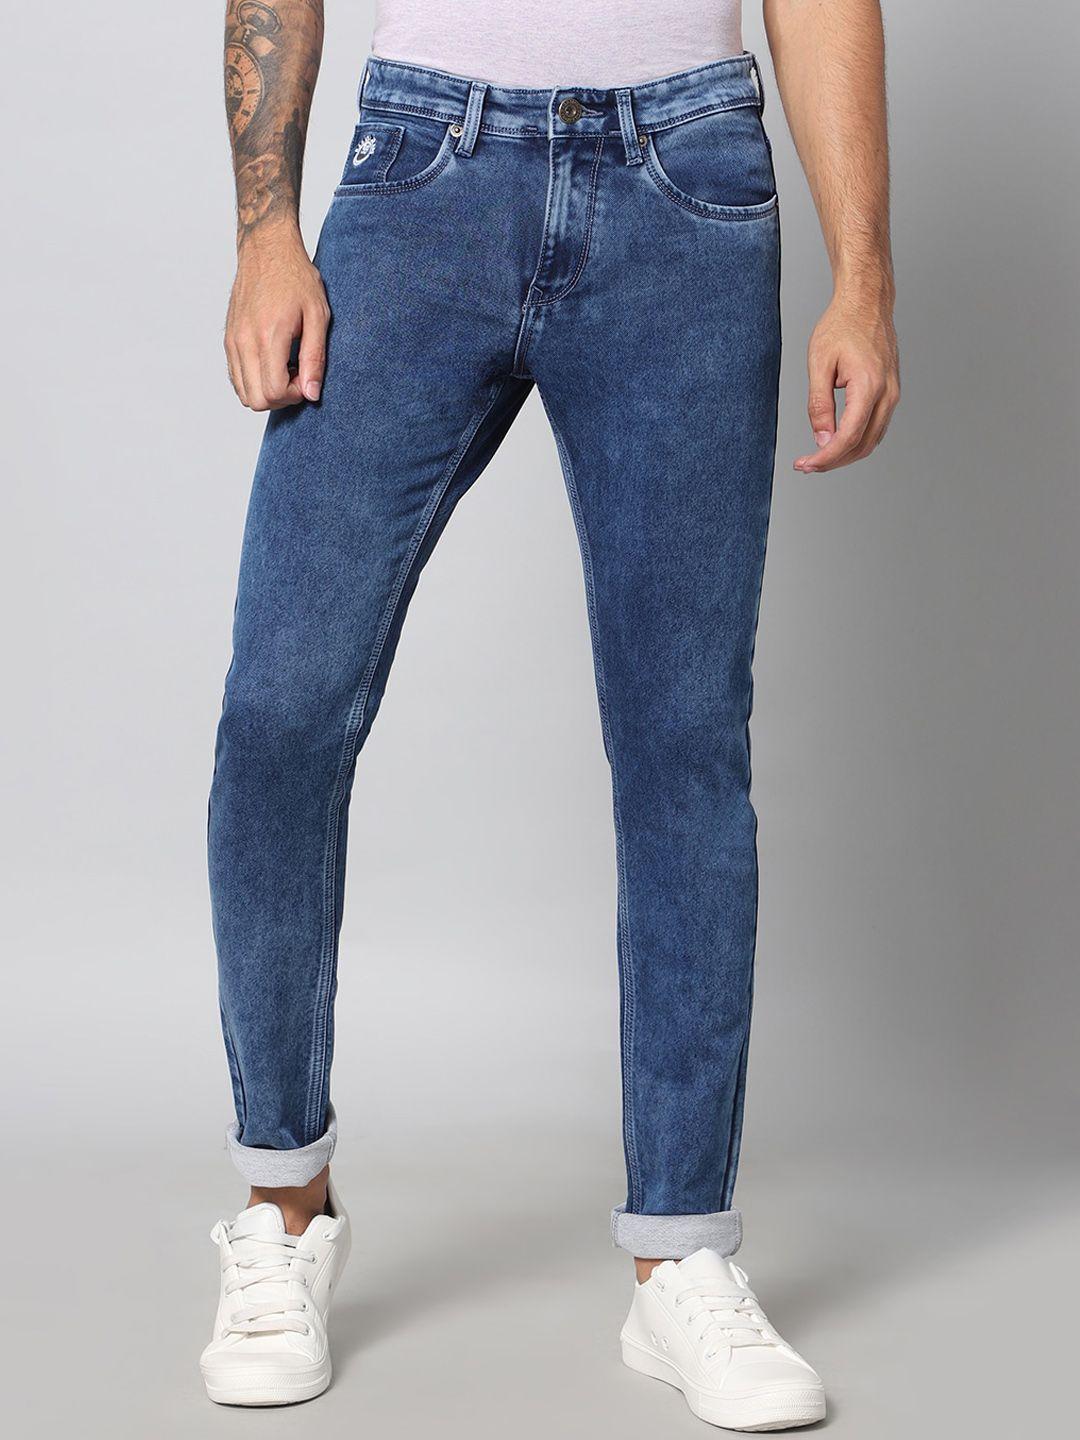 hj-hasasi-men-mid-rise-clean-look-light-fade-pure-cotton-relaxed-fit-stretchable-jeans